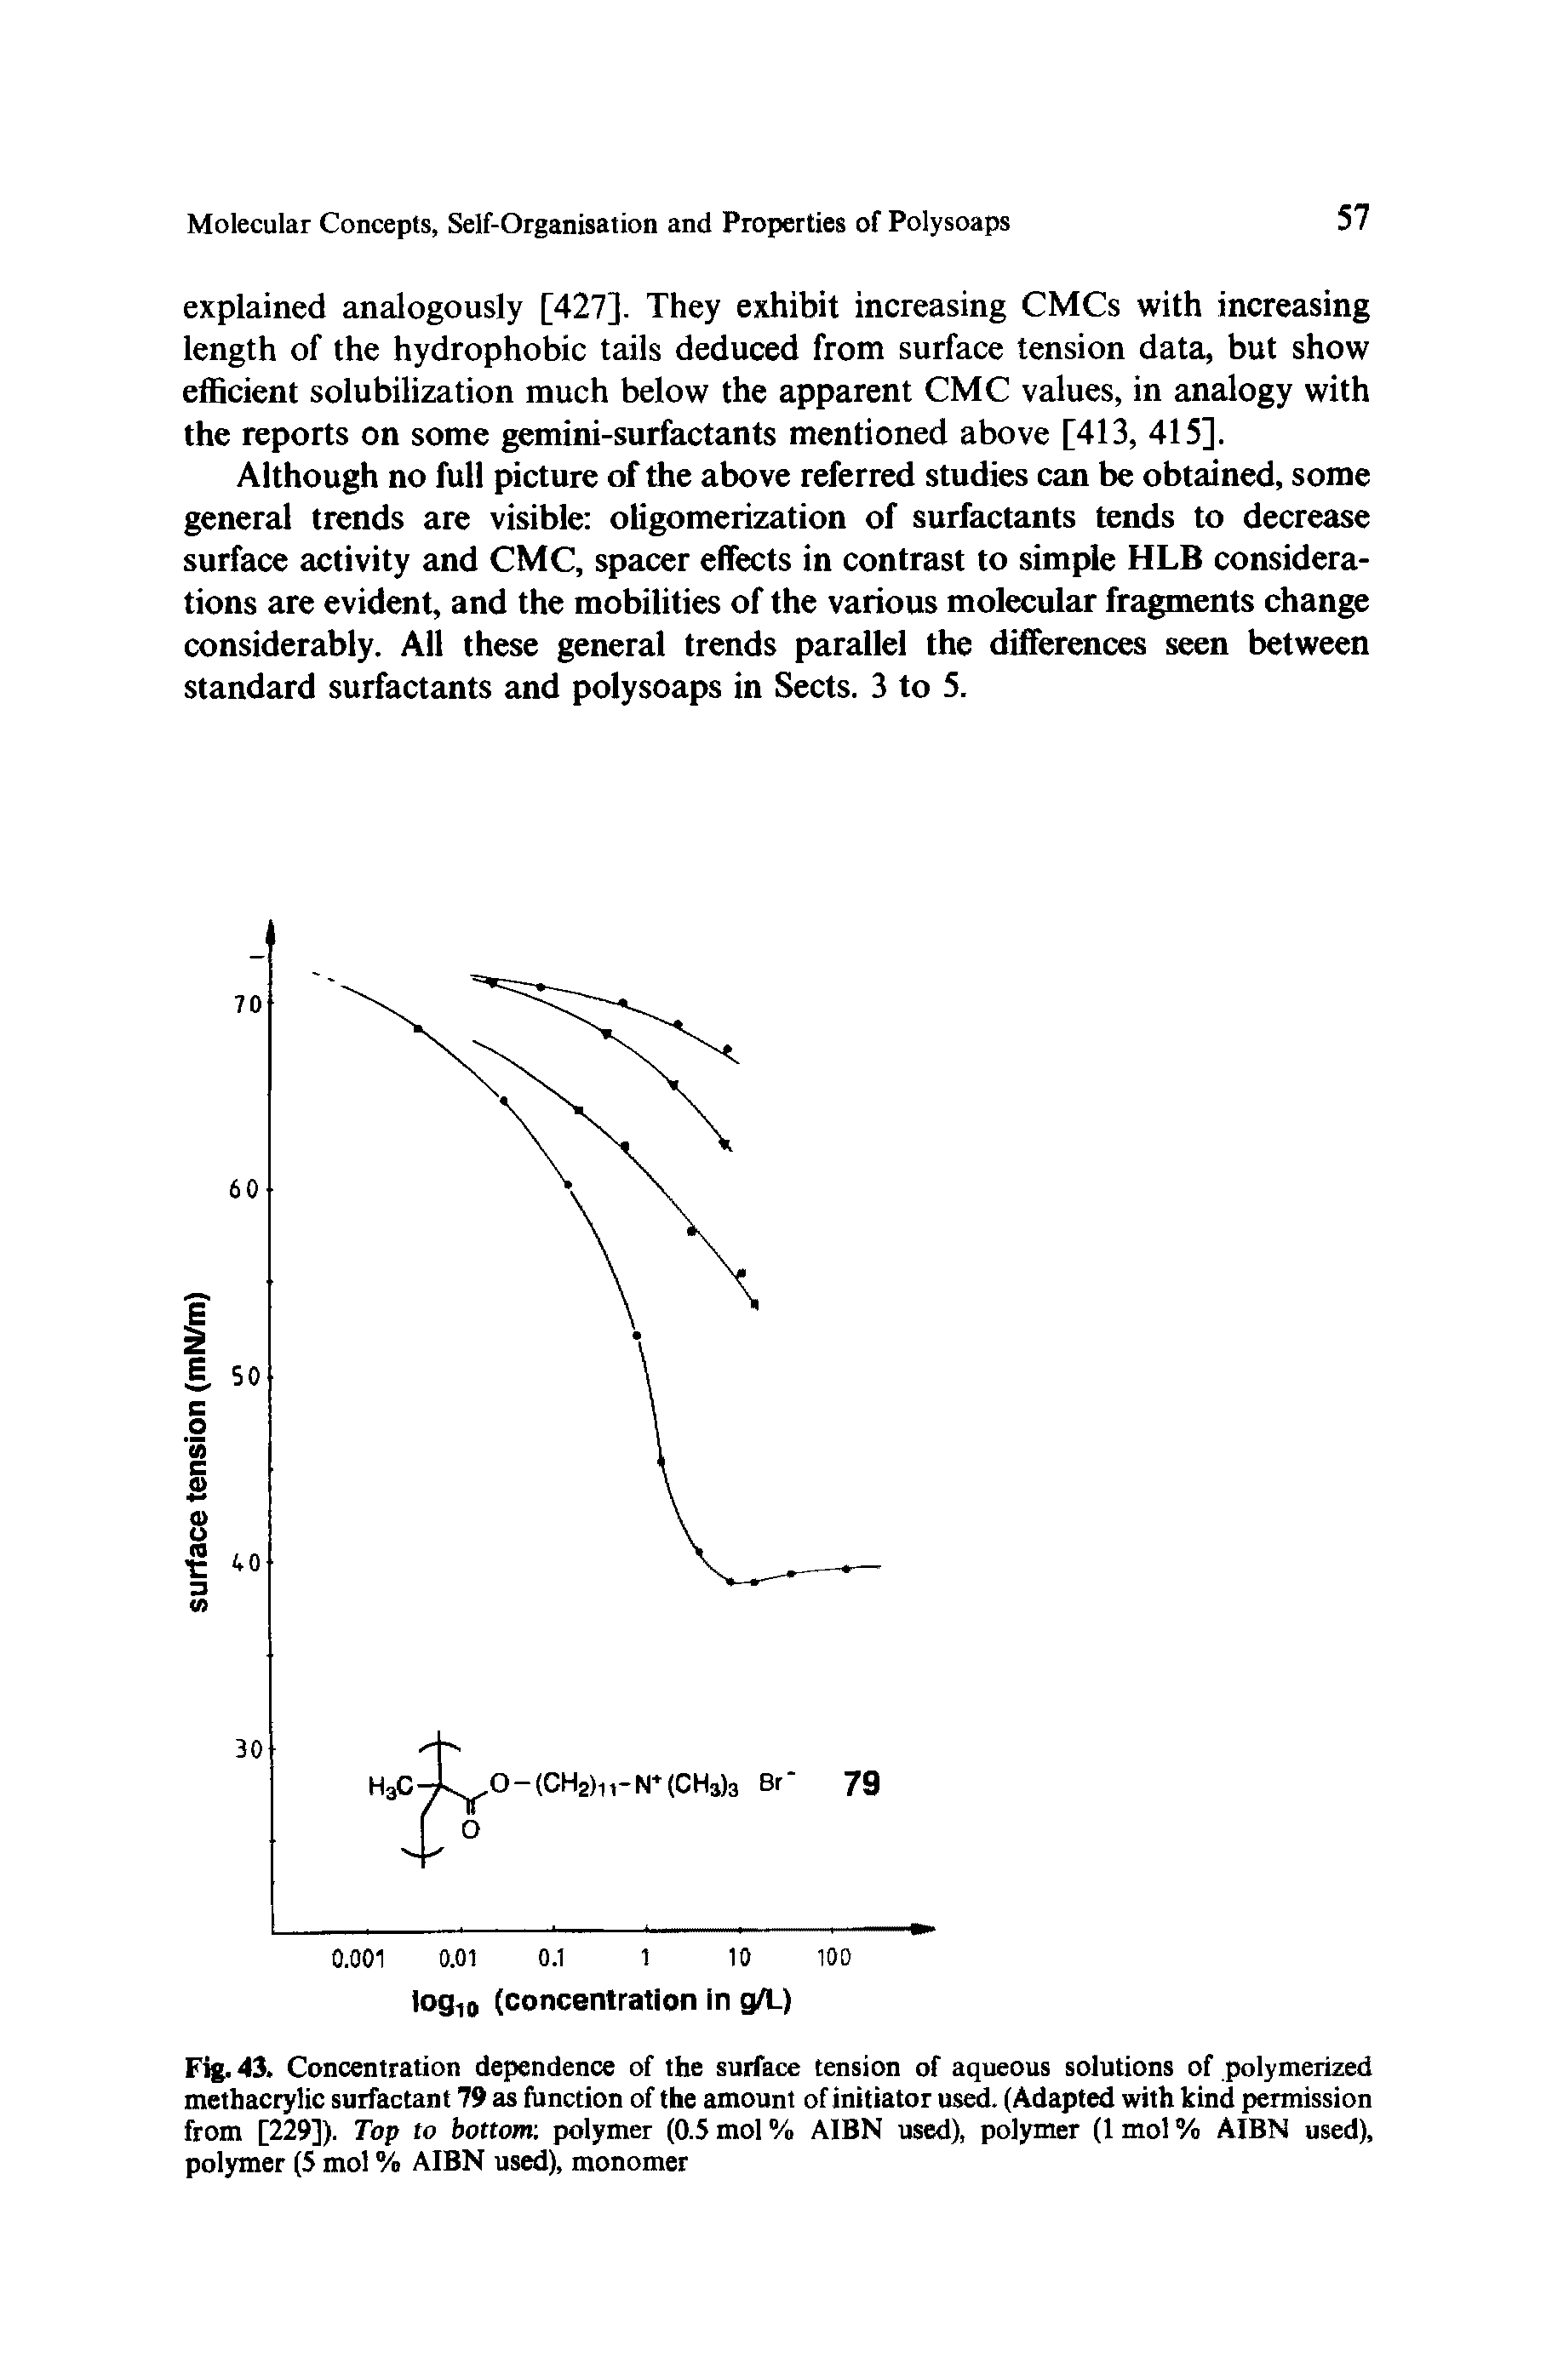 Fig. 43. Concentration dependence of the surface tension of aqueous solutions of polymerized methacrylic surfactant 79 as function of the amount of initiator used. (Adapted with kind permission from [229]). Top to bottom polymer (0.5 mol % AIBN used), polymer (1 mol % AIBN used), polymer (5 mol % AIBN used), monomer...